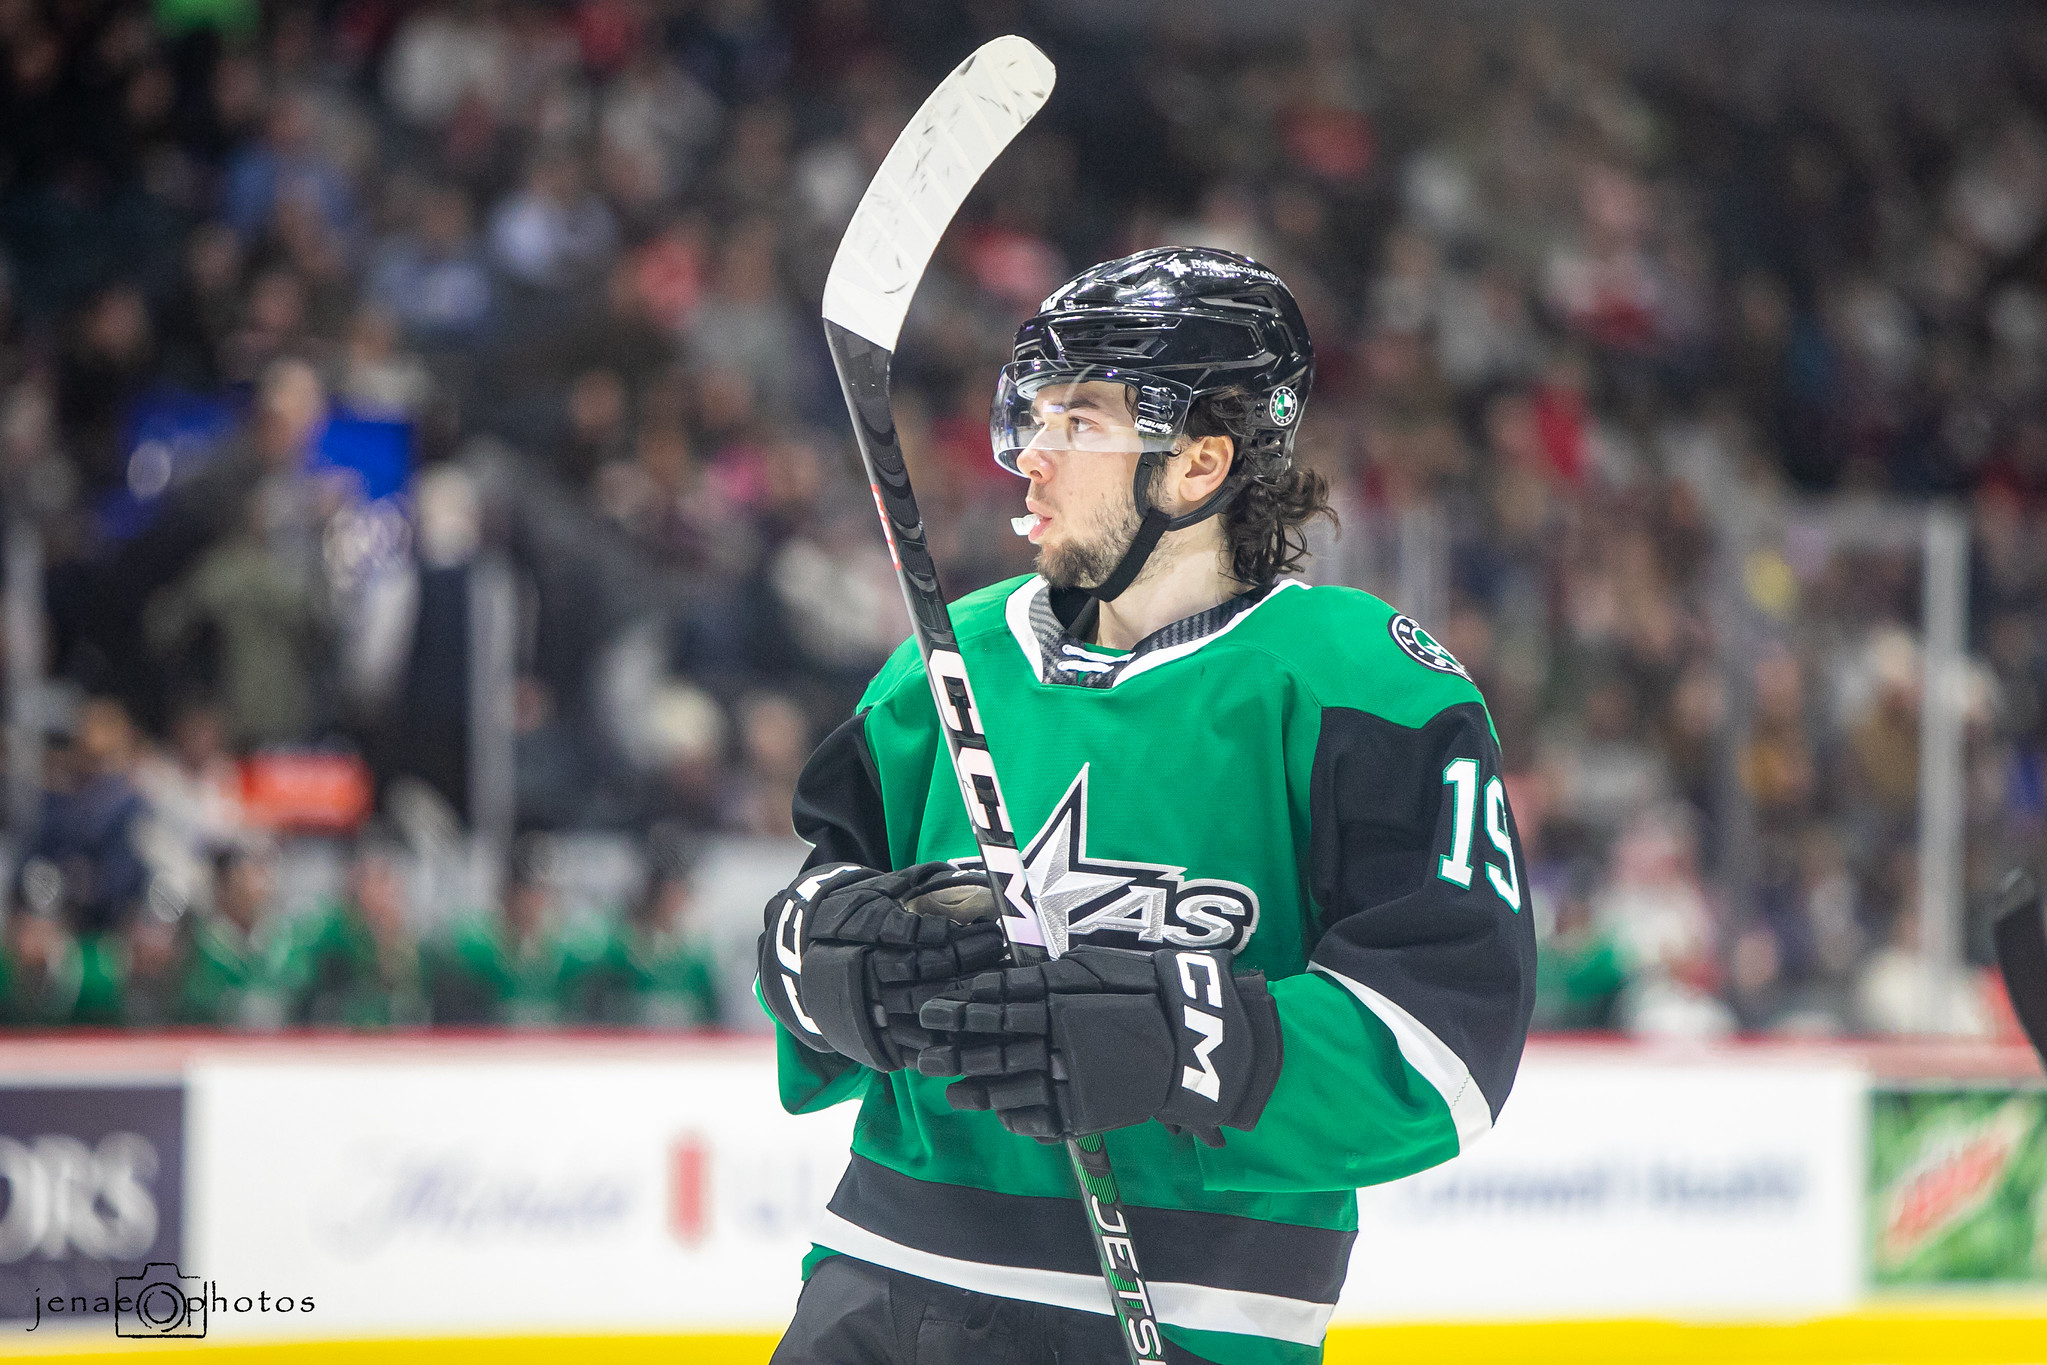 The Dallas Stars had a Texas Rangers night and wore powder blue